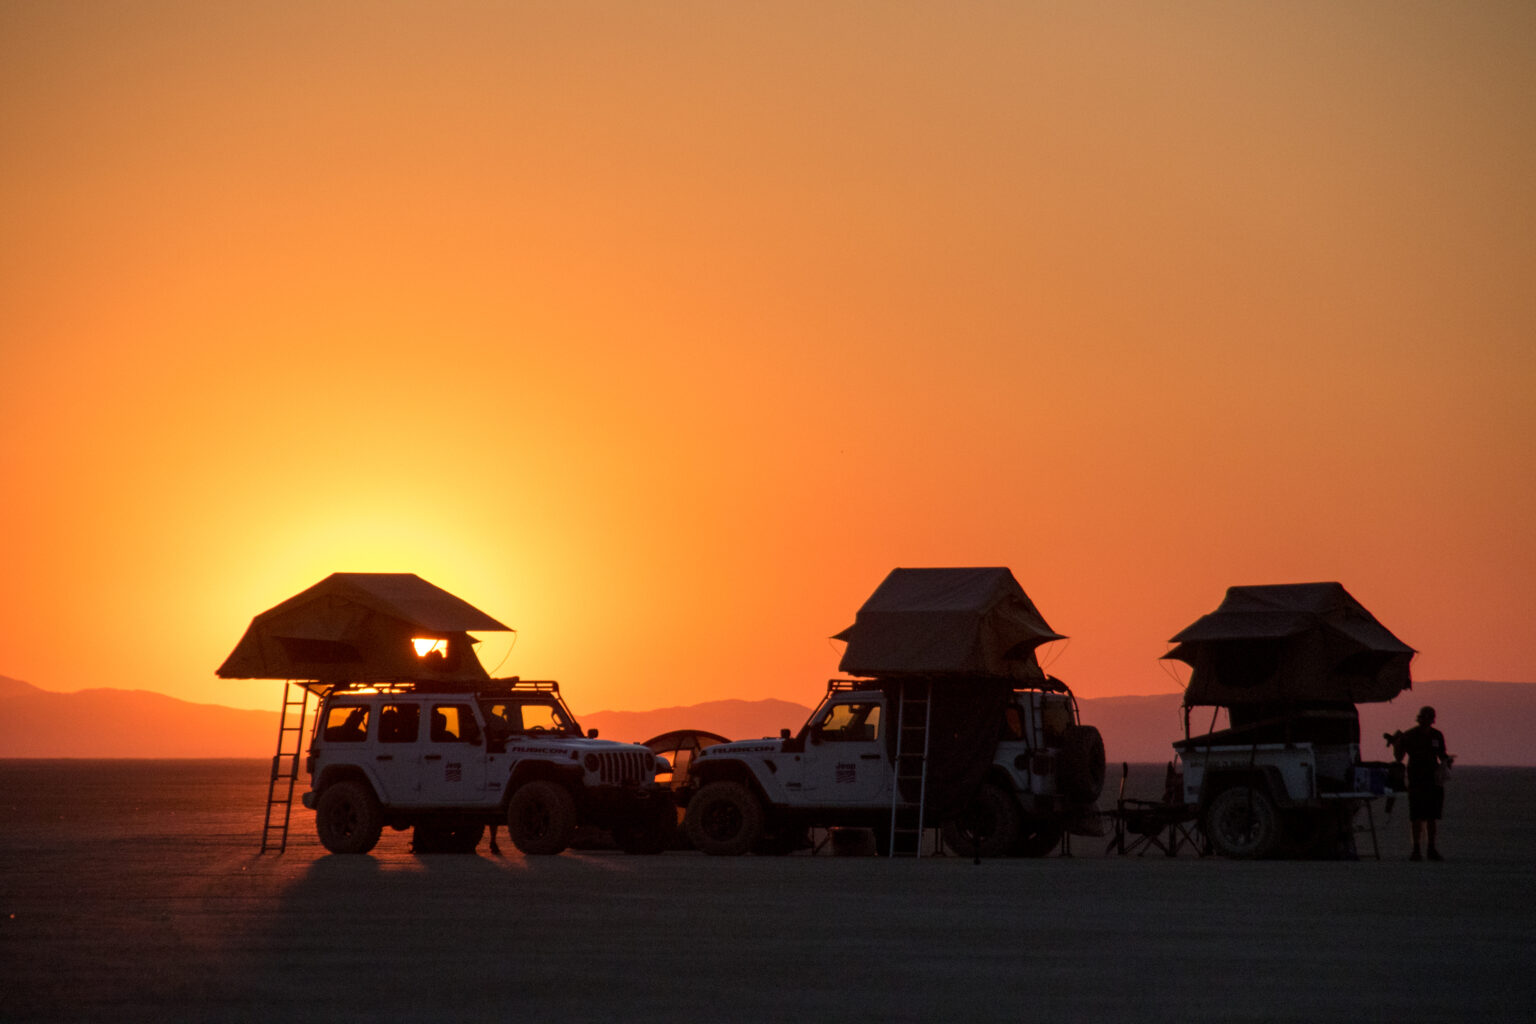 Rooftop tents pictured before a sunset